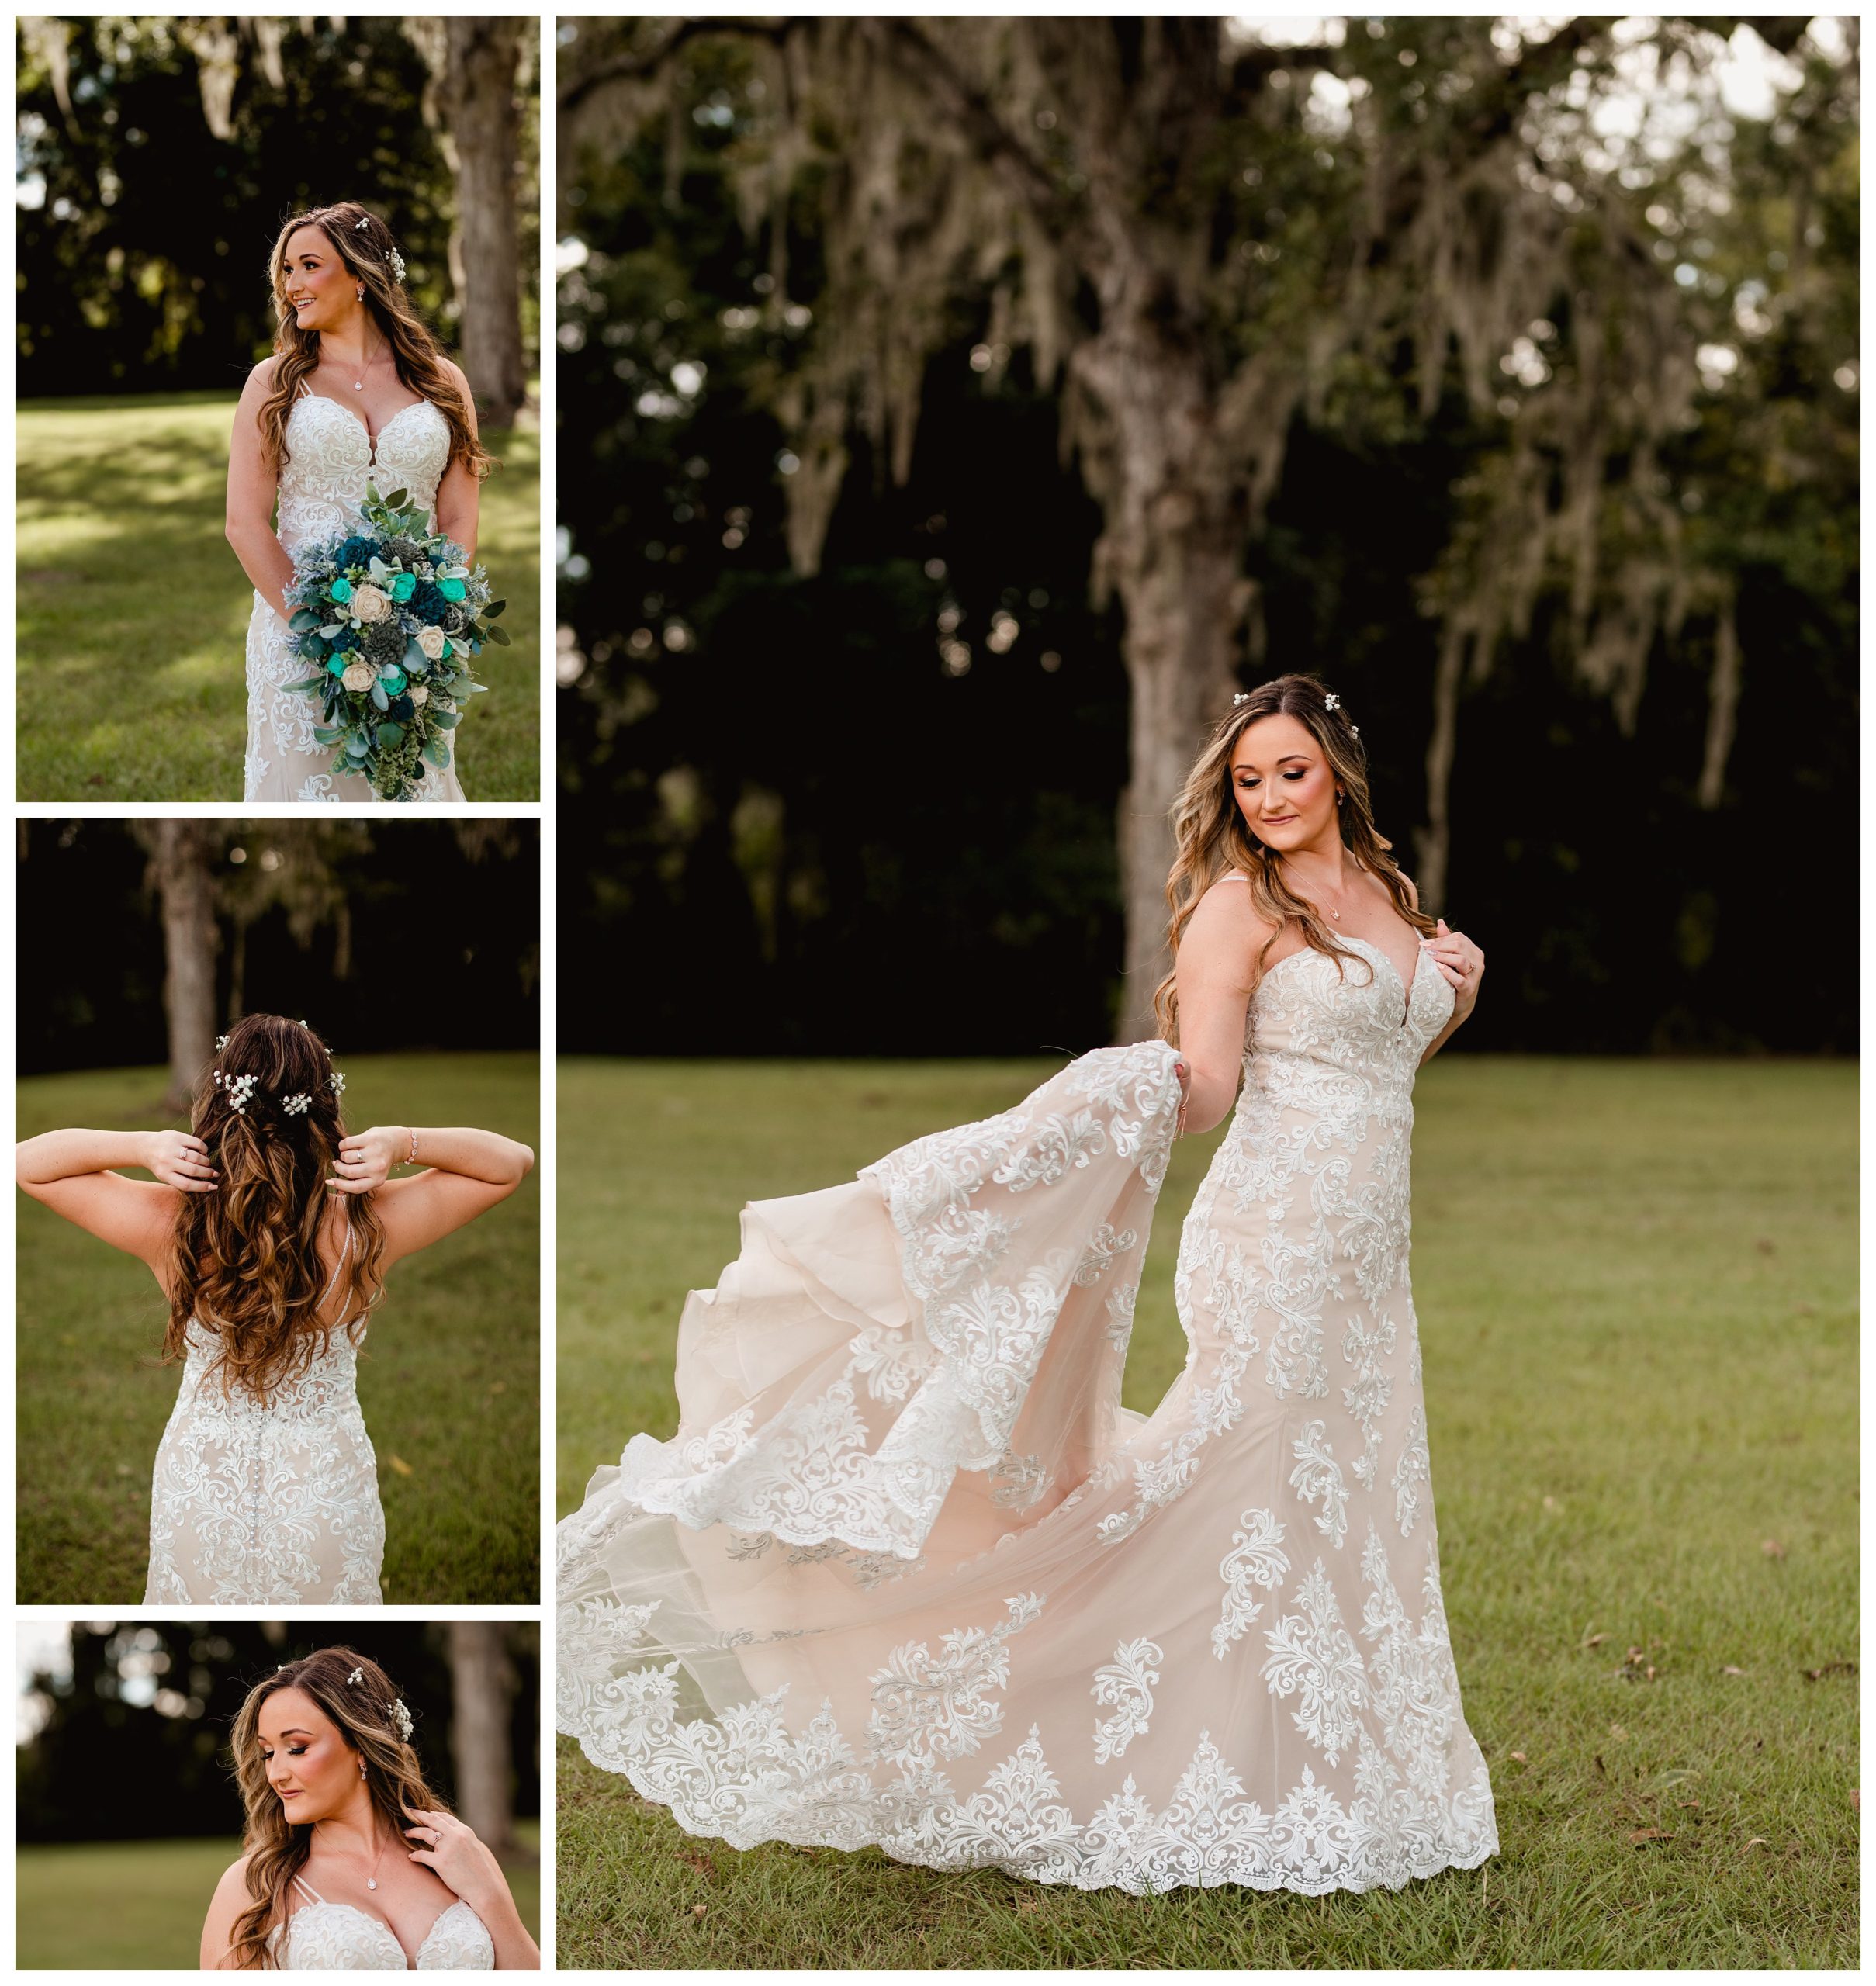 Portraits of the bride, lifestyle in her wedding gown.